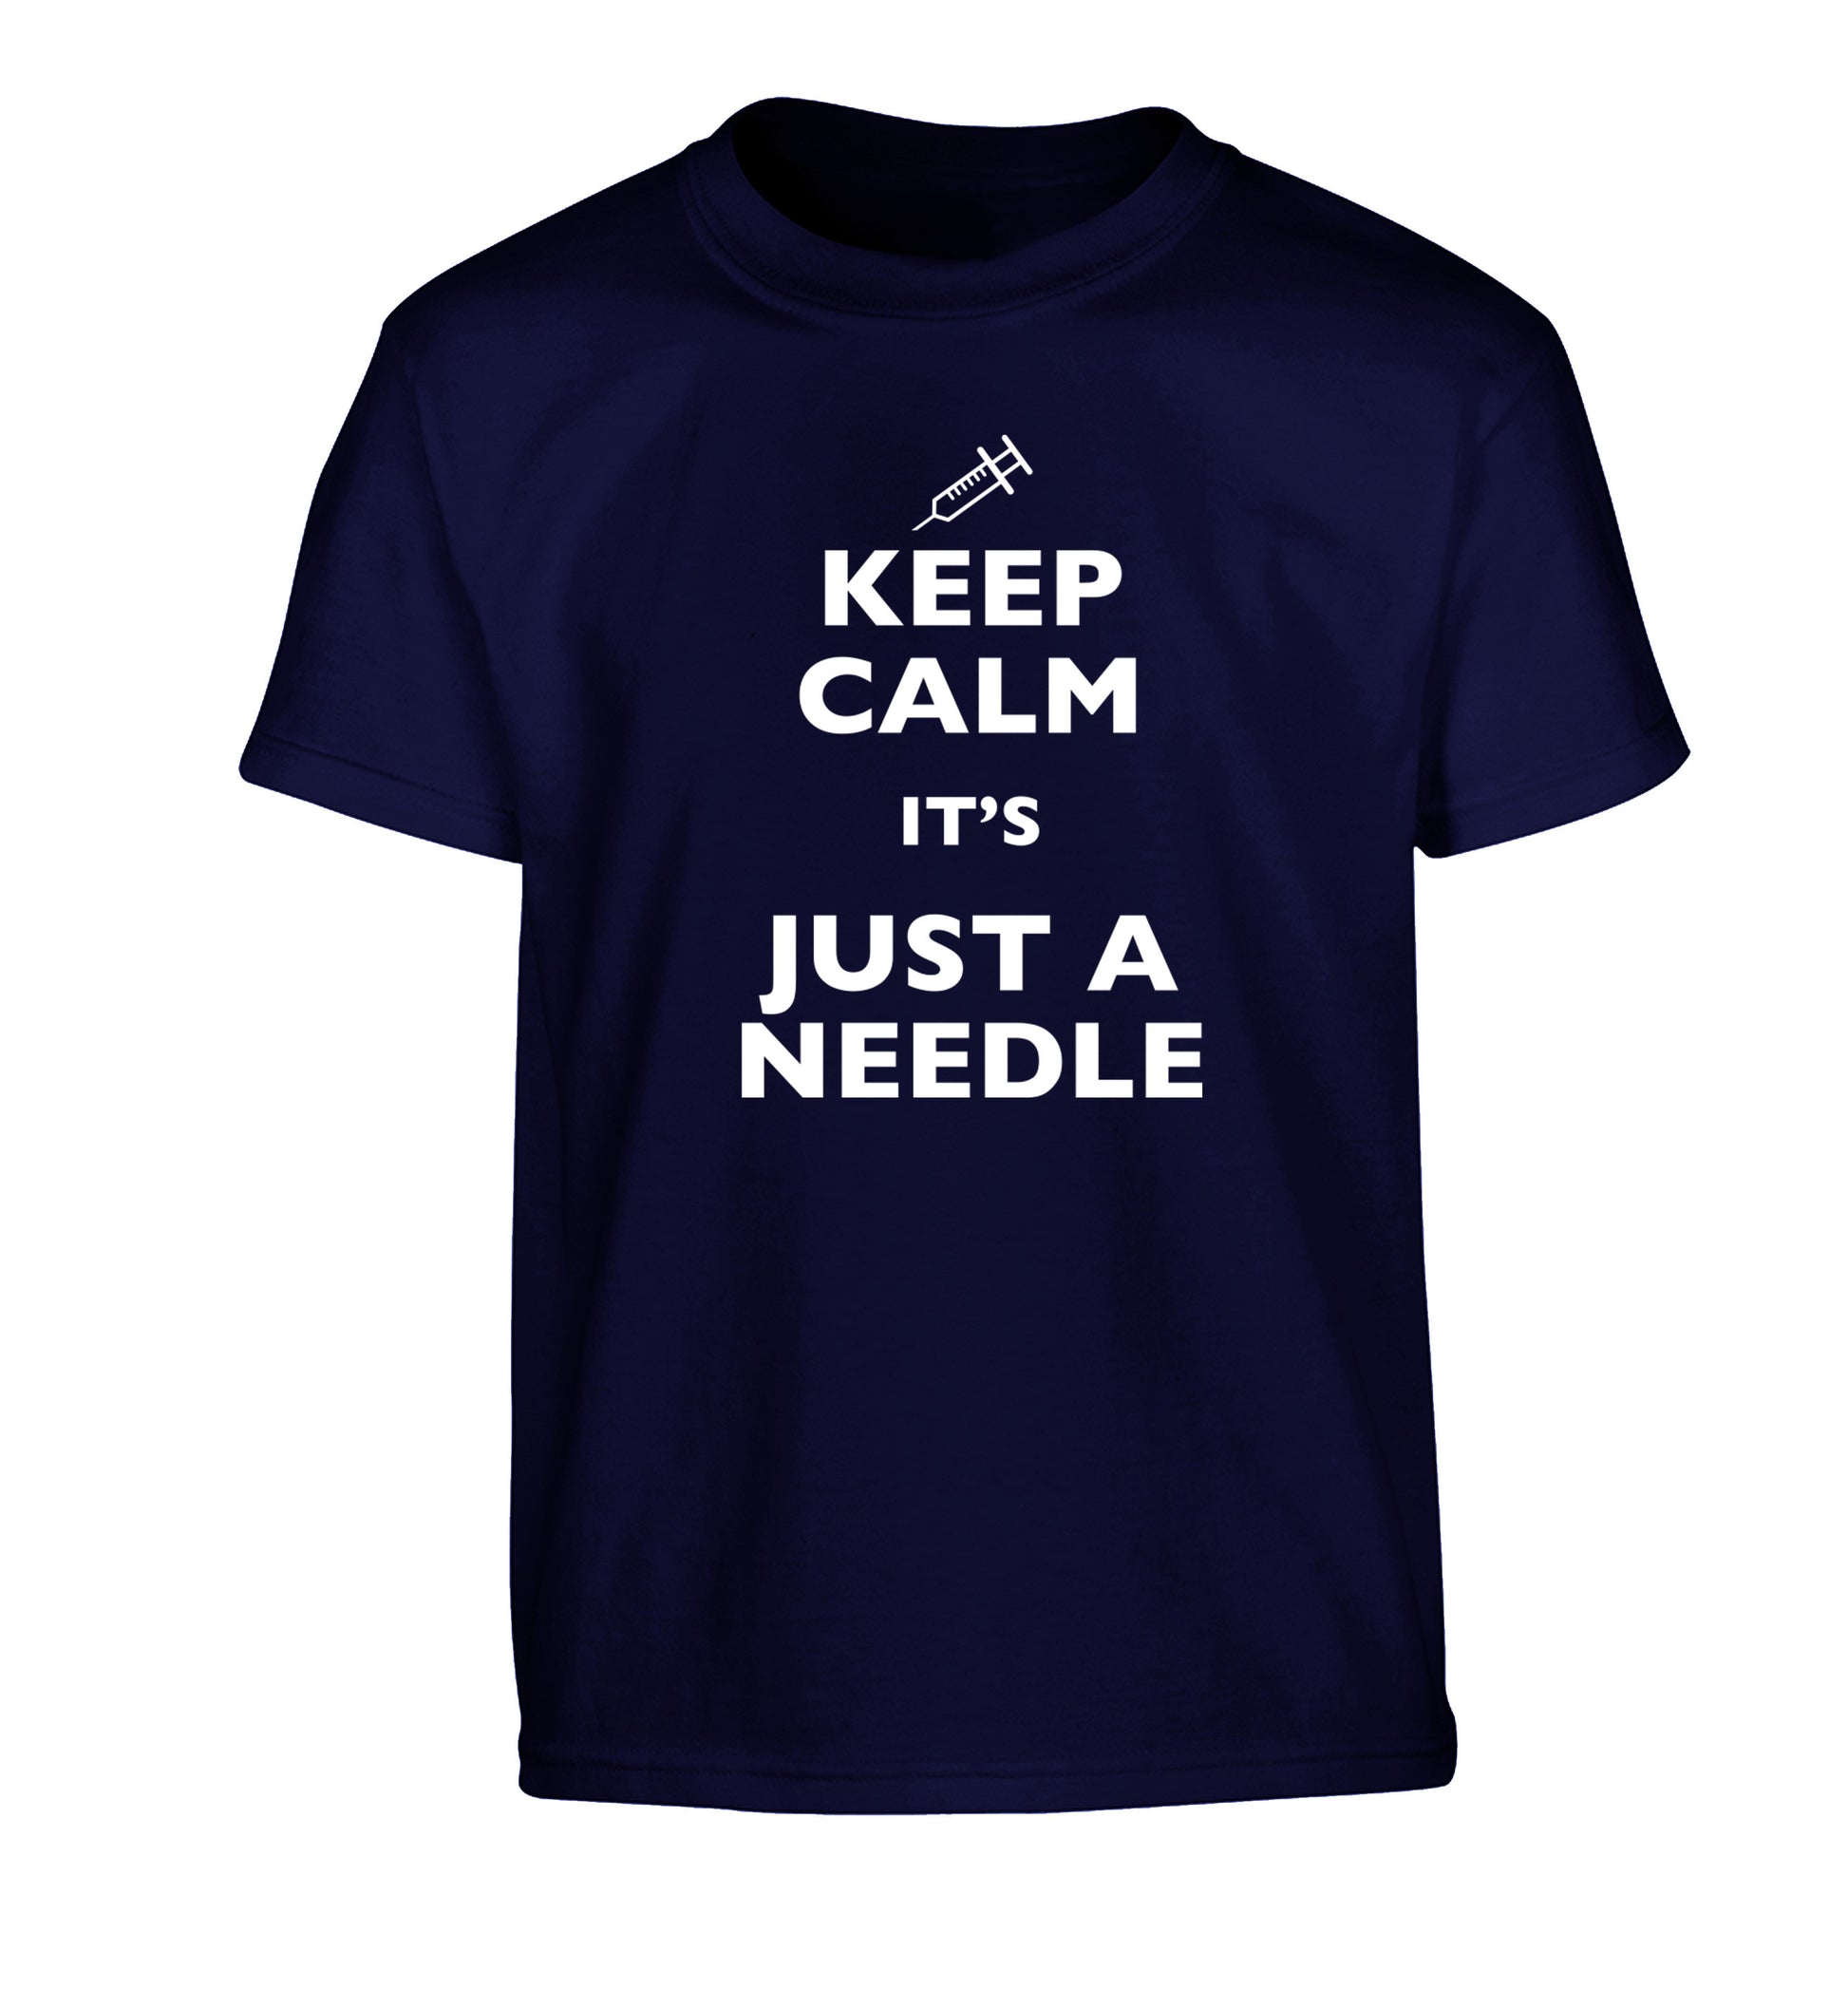 Keep calm it's only a needle Children's navy Tshirt 12-14 Years